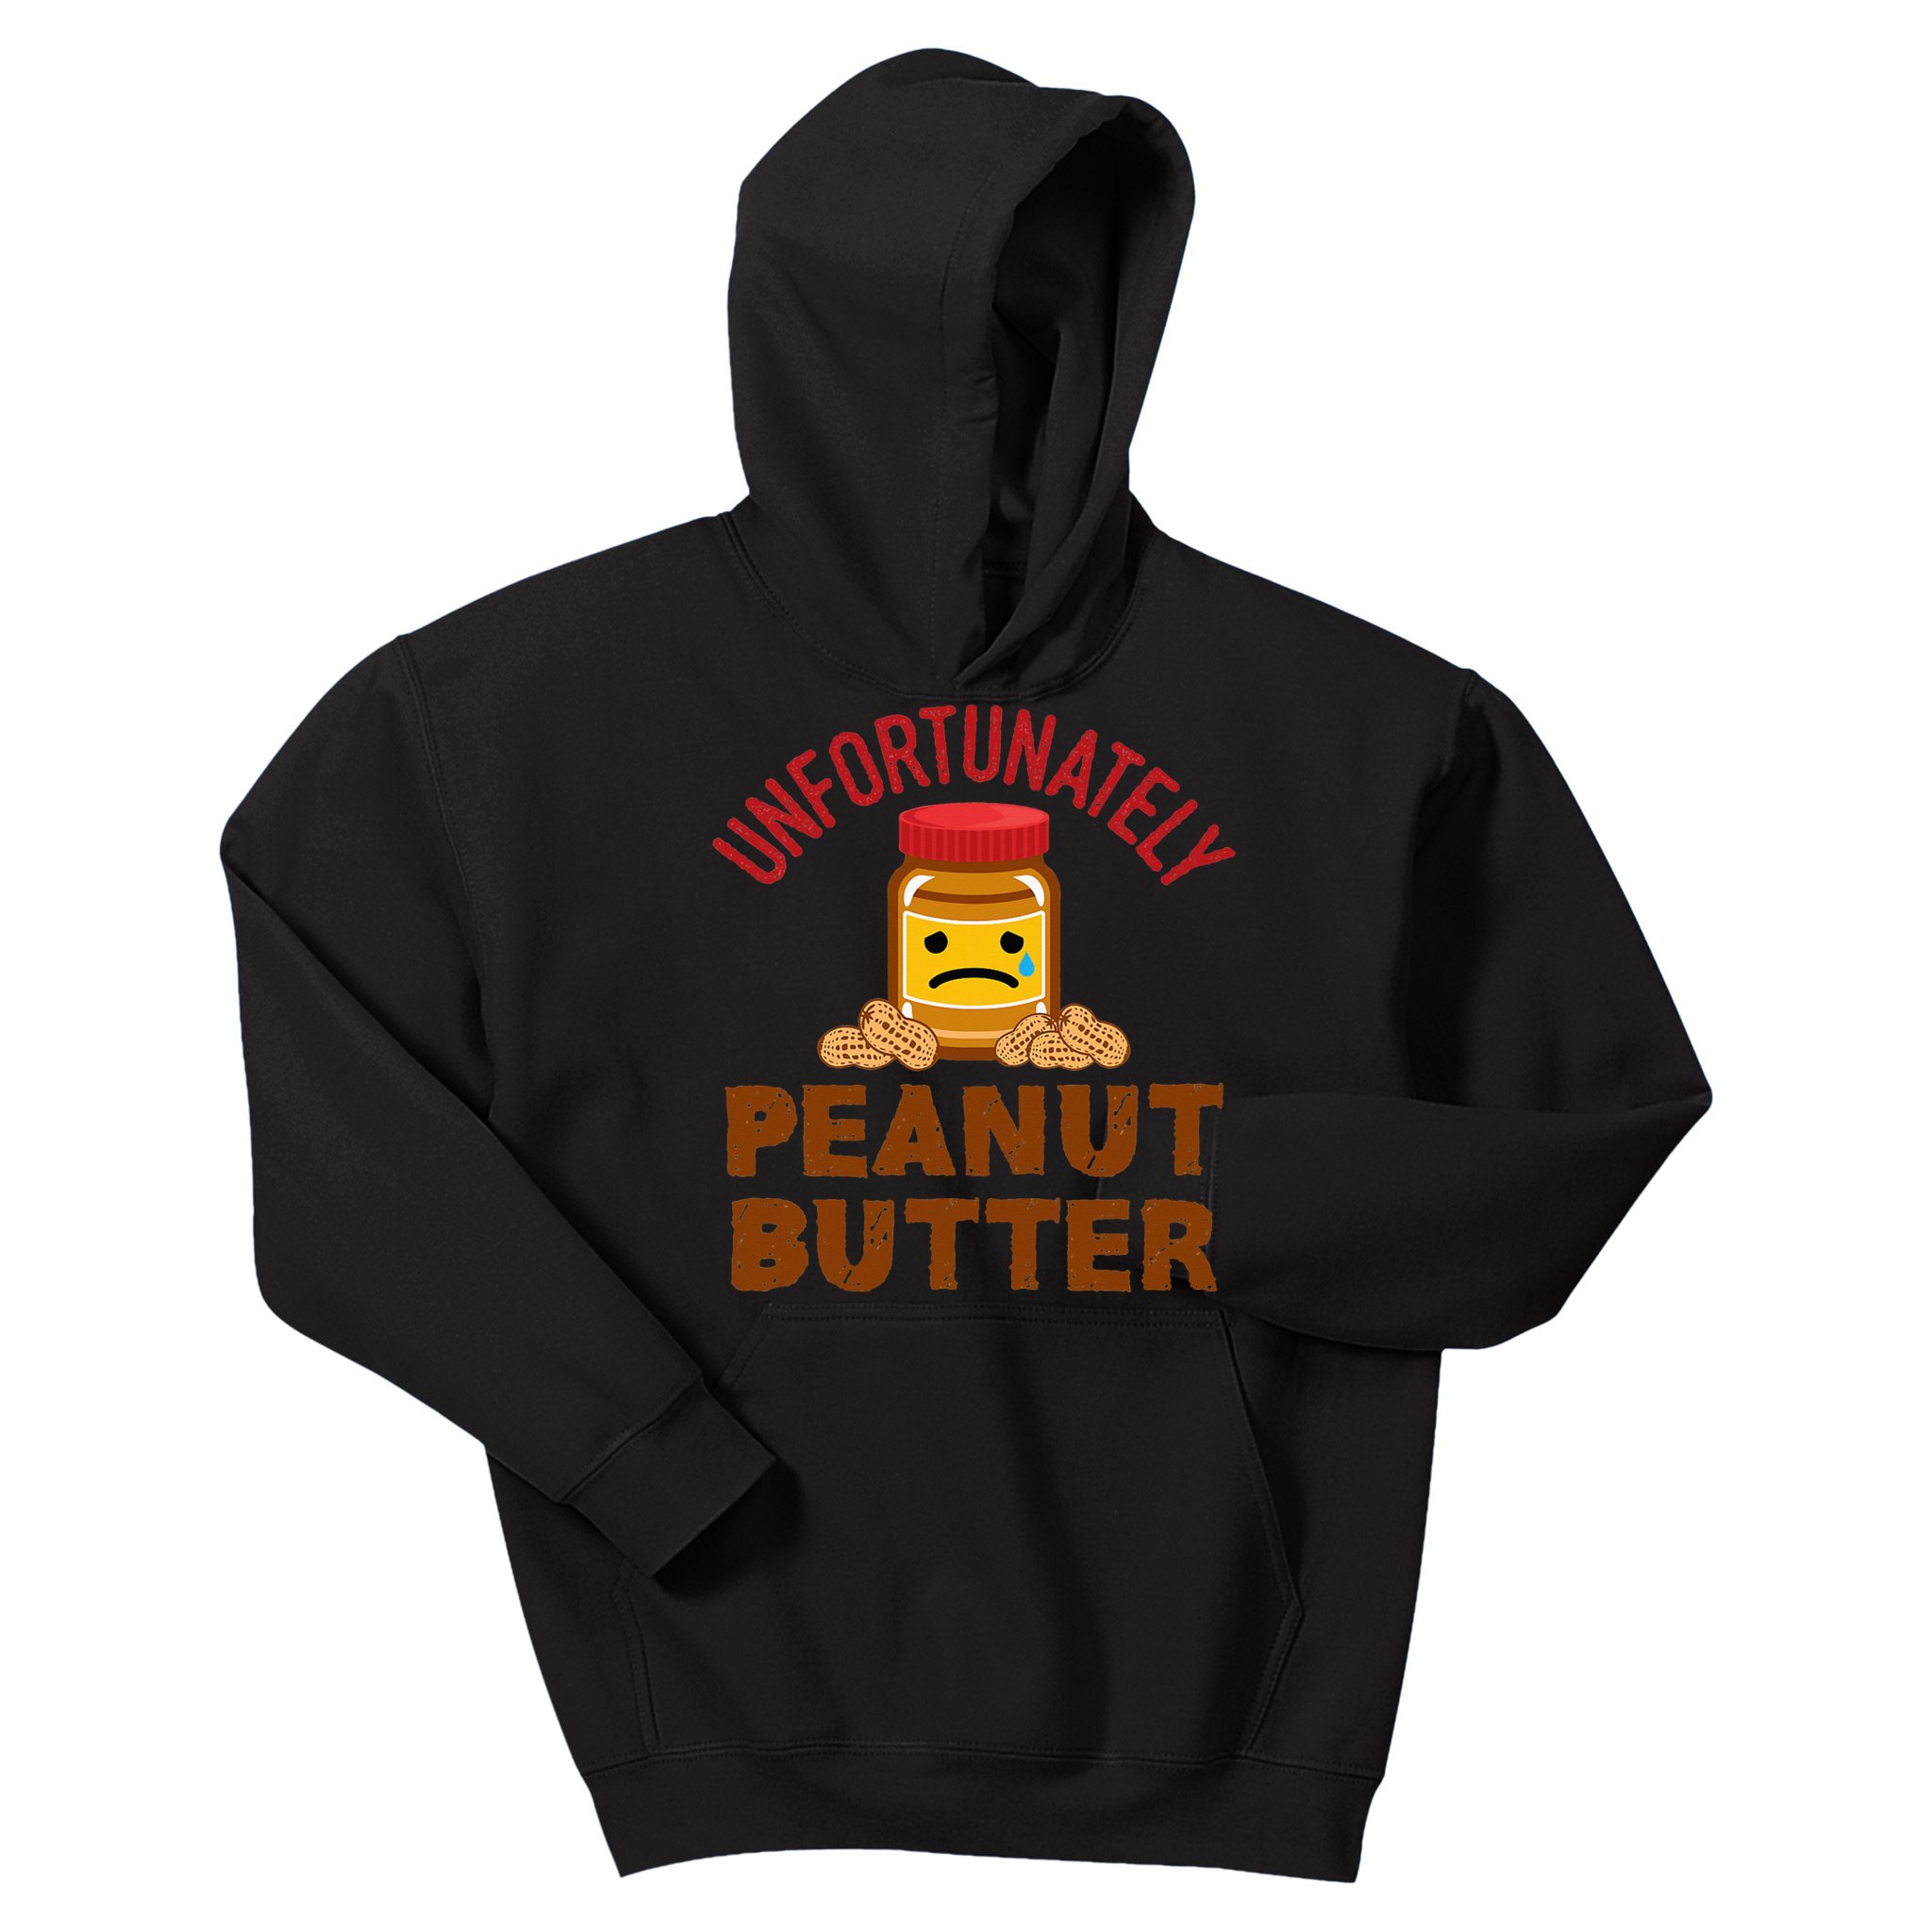 Unfortunately Peanut Butter Dutch Expression Funny Too Bad Kids Hoodie ...